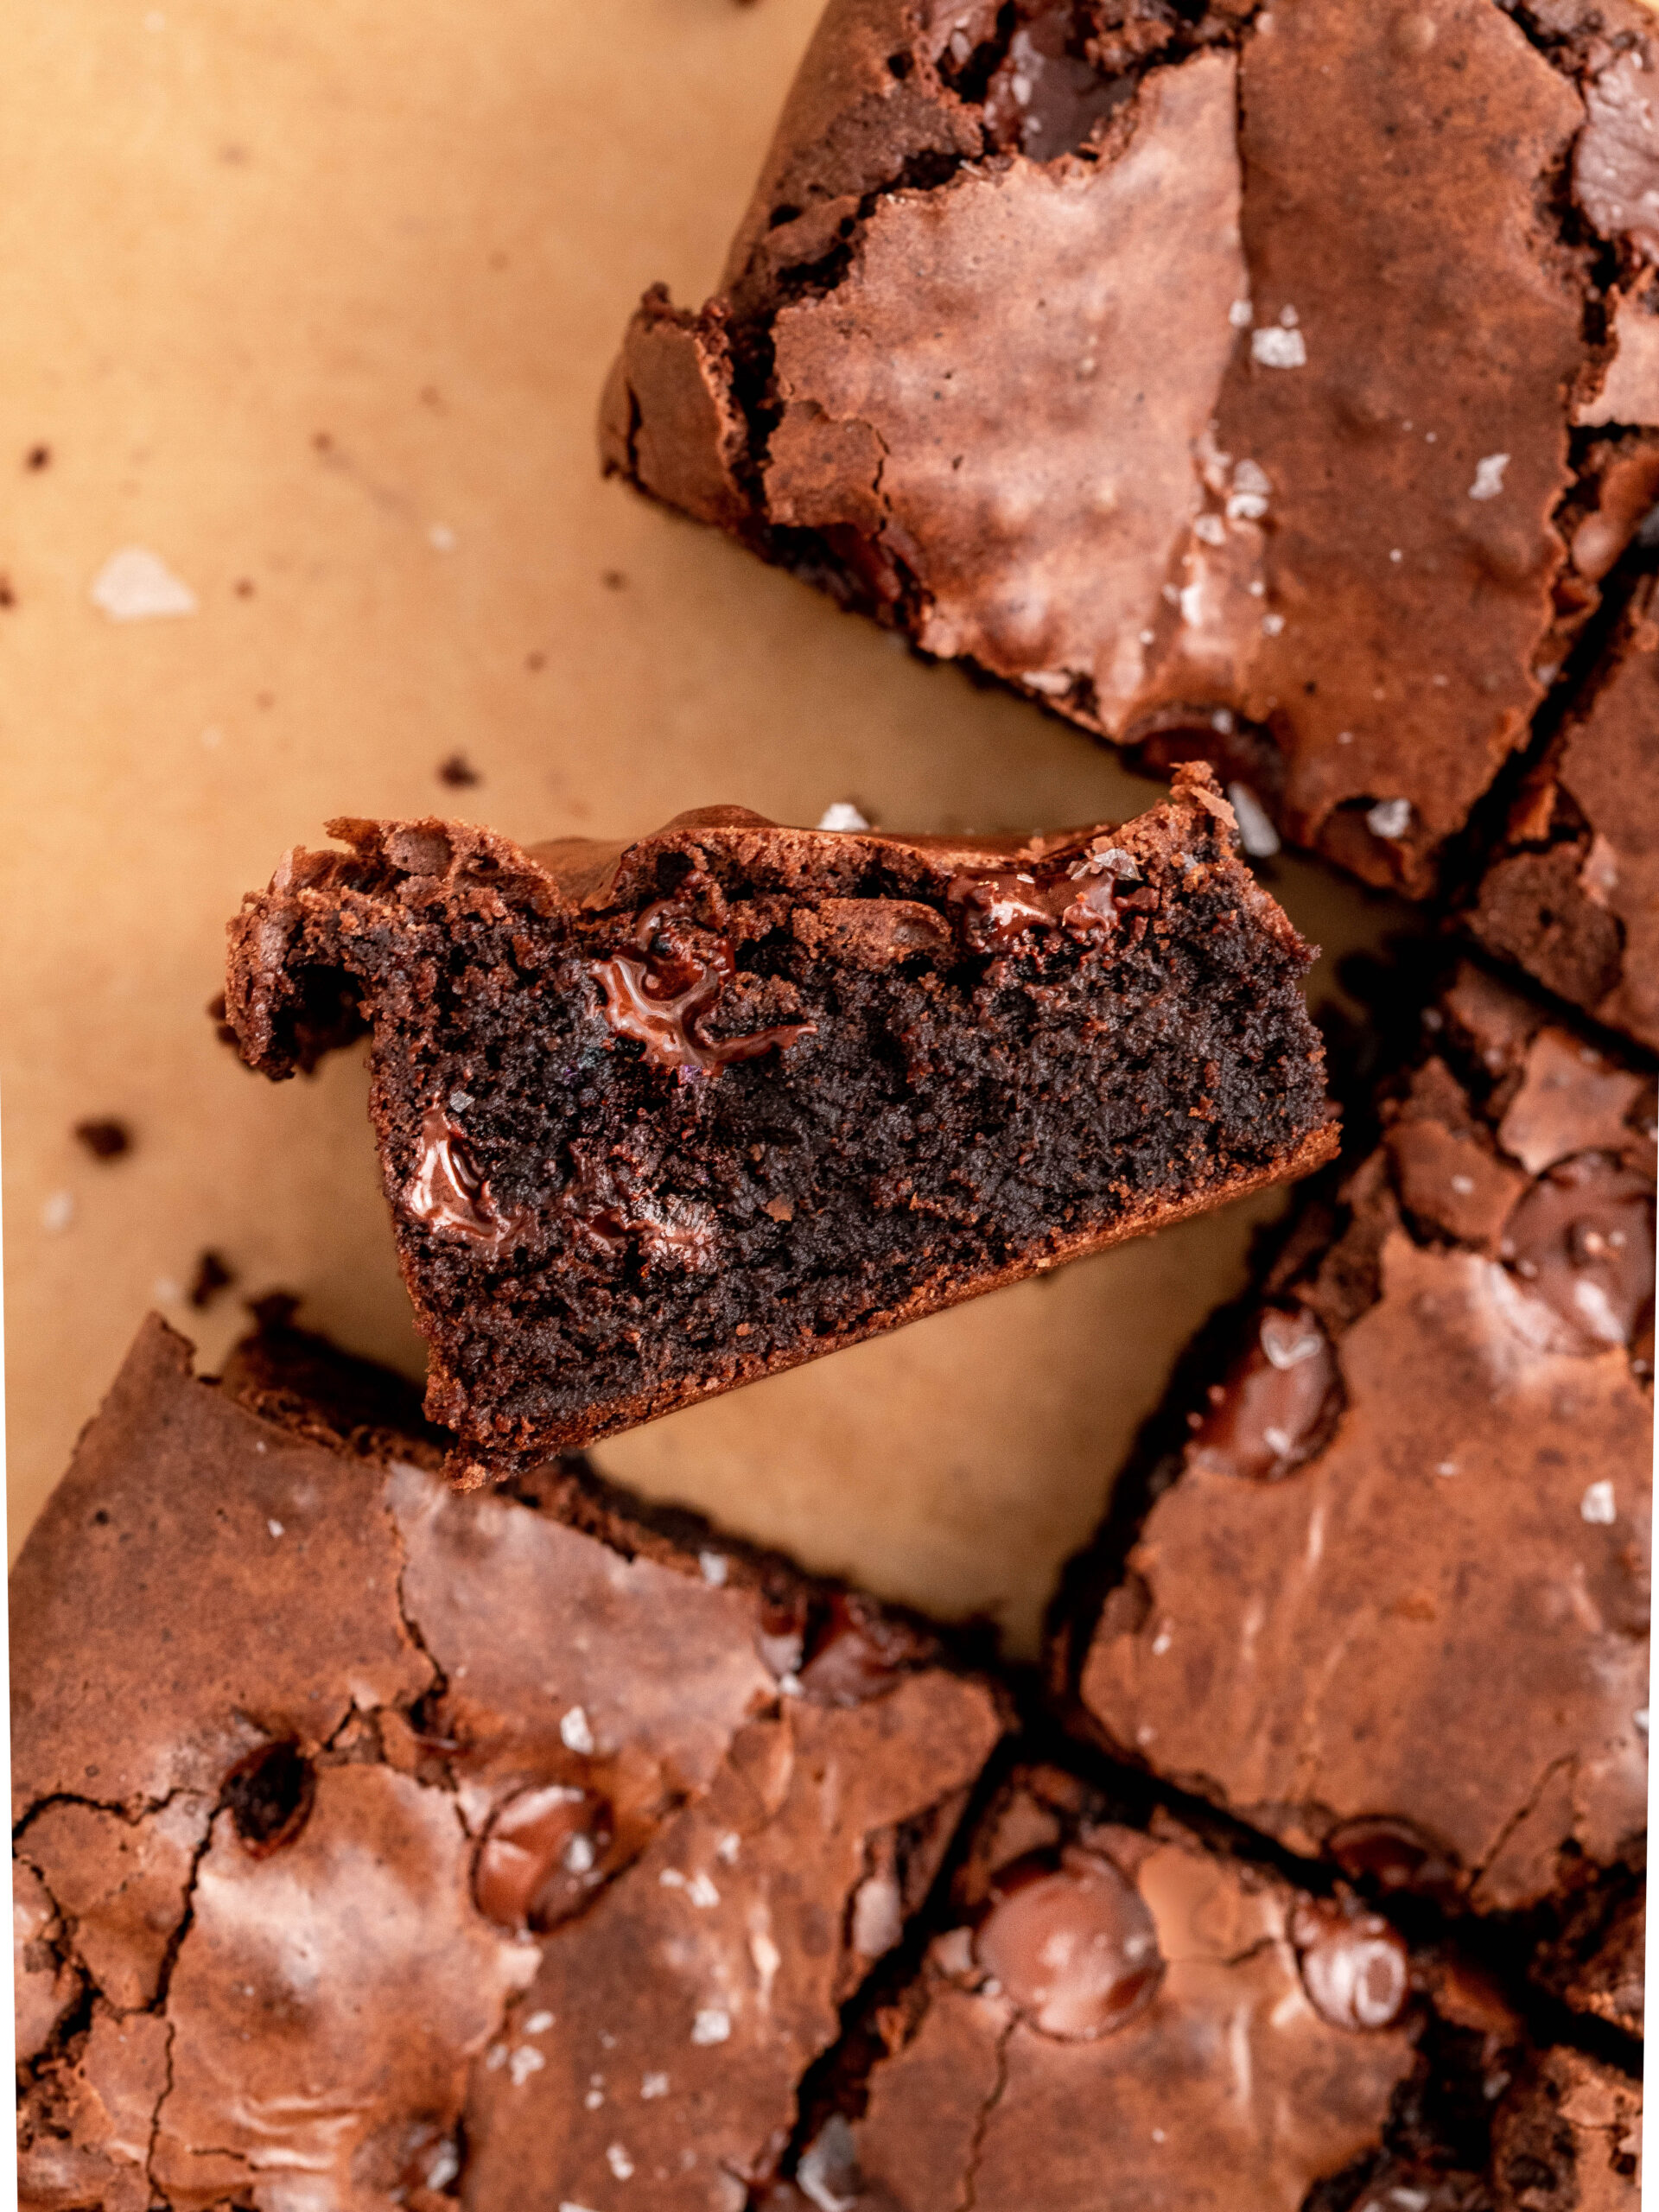 Slice cut of the small batch brownies